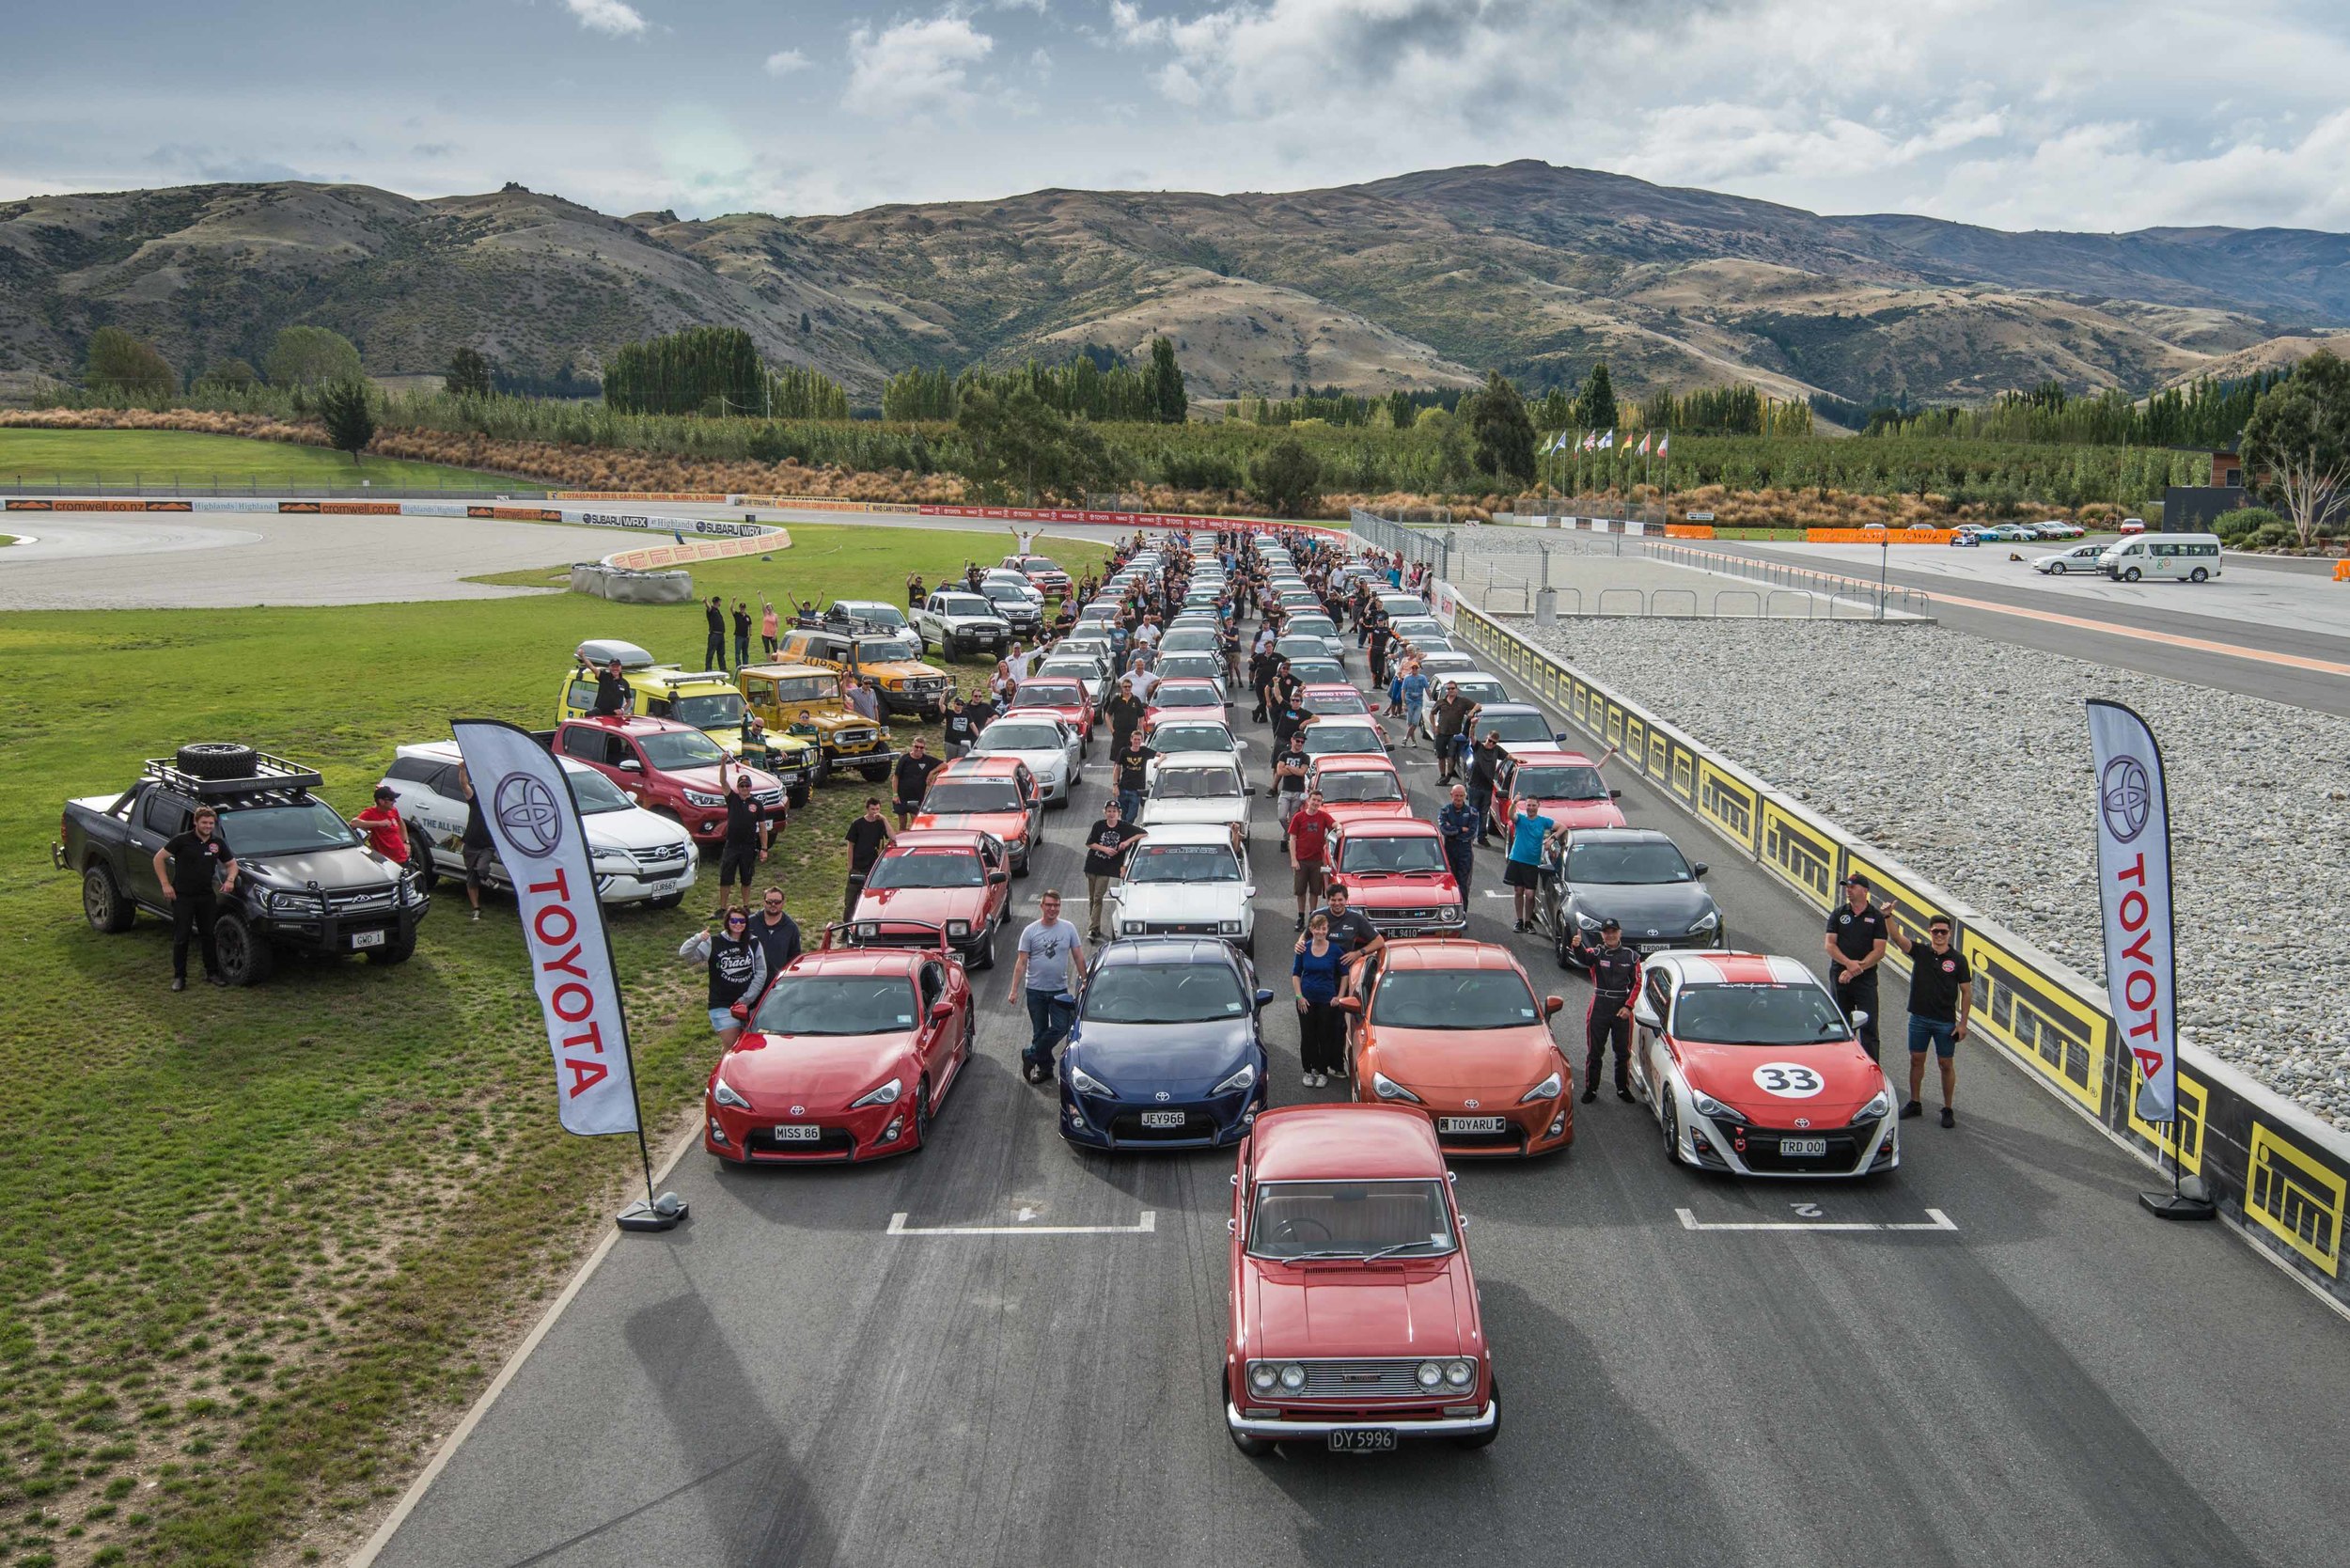 2016 Toyota Festival - drivers and their vehicles lined up on grid at Highland's Motorsport Park in Central Otago .jpg